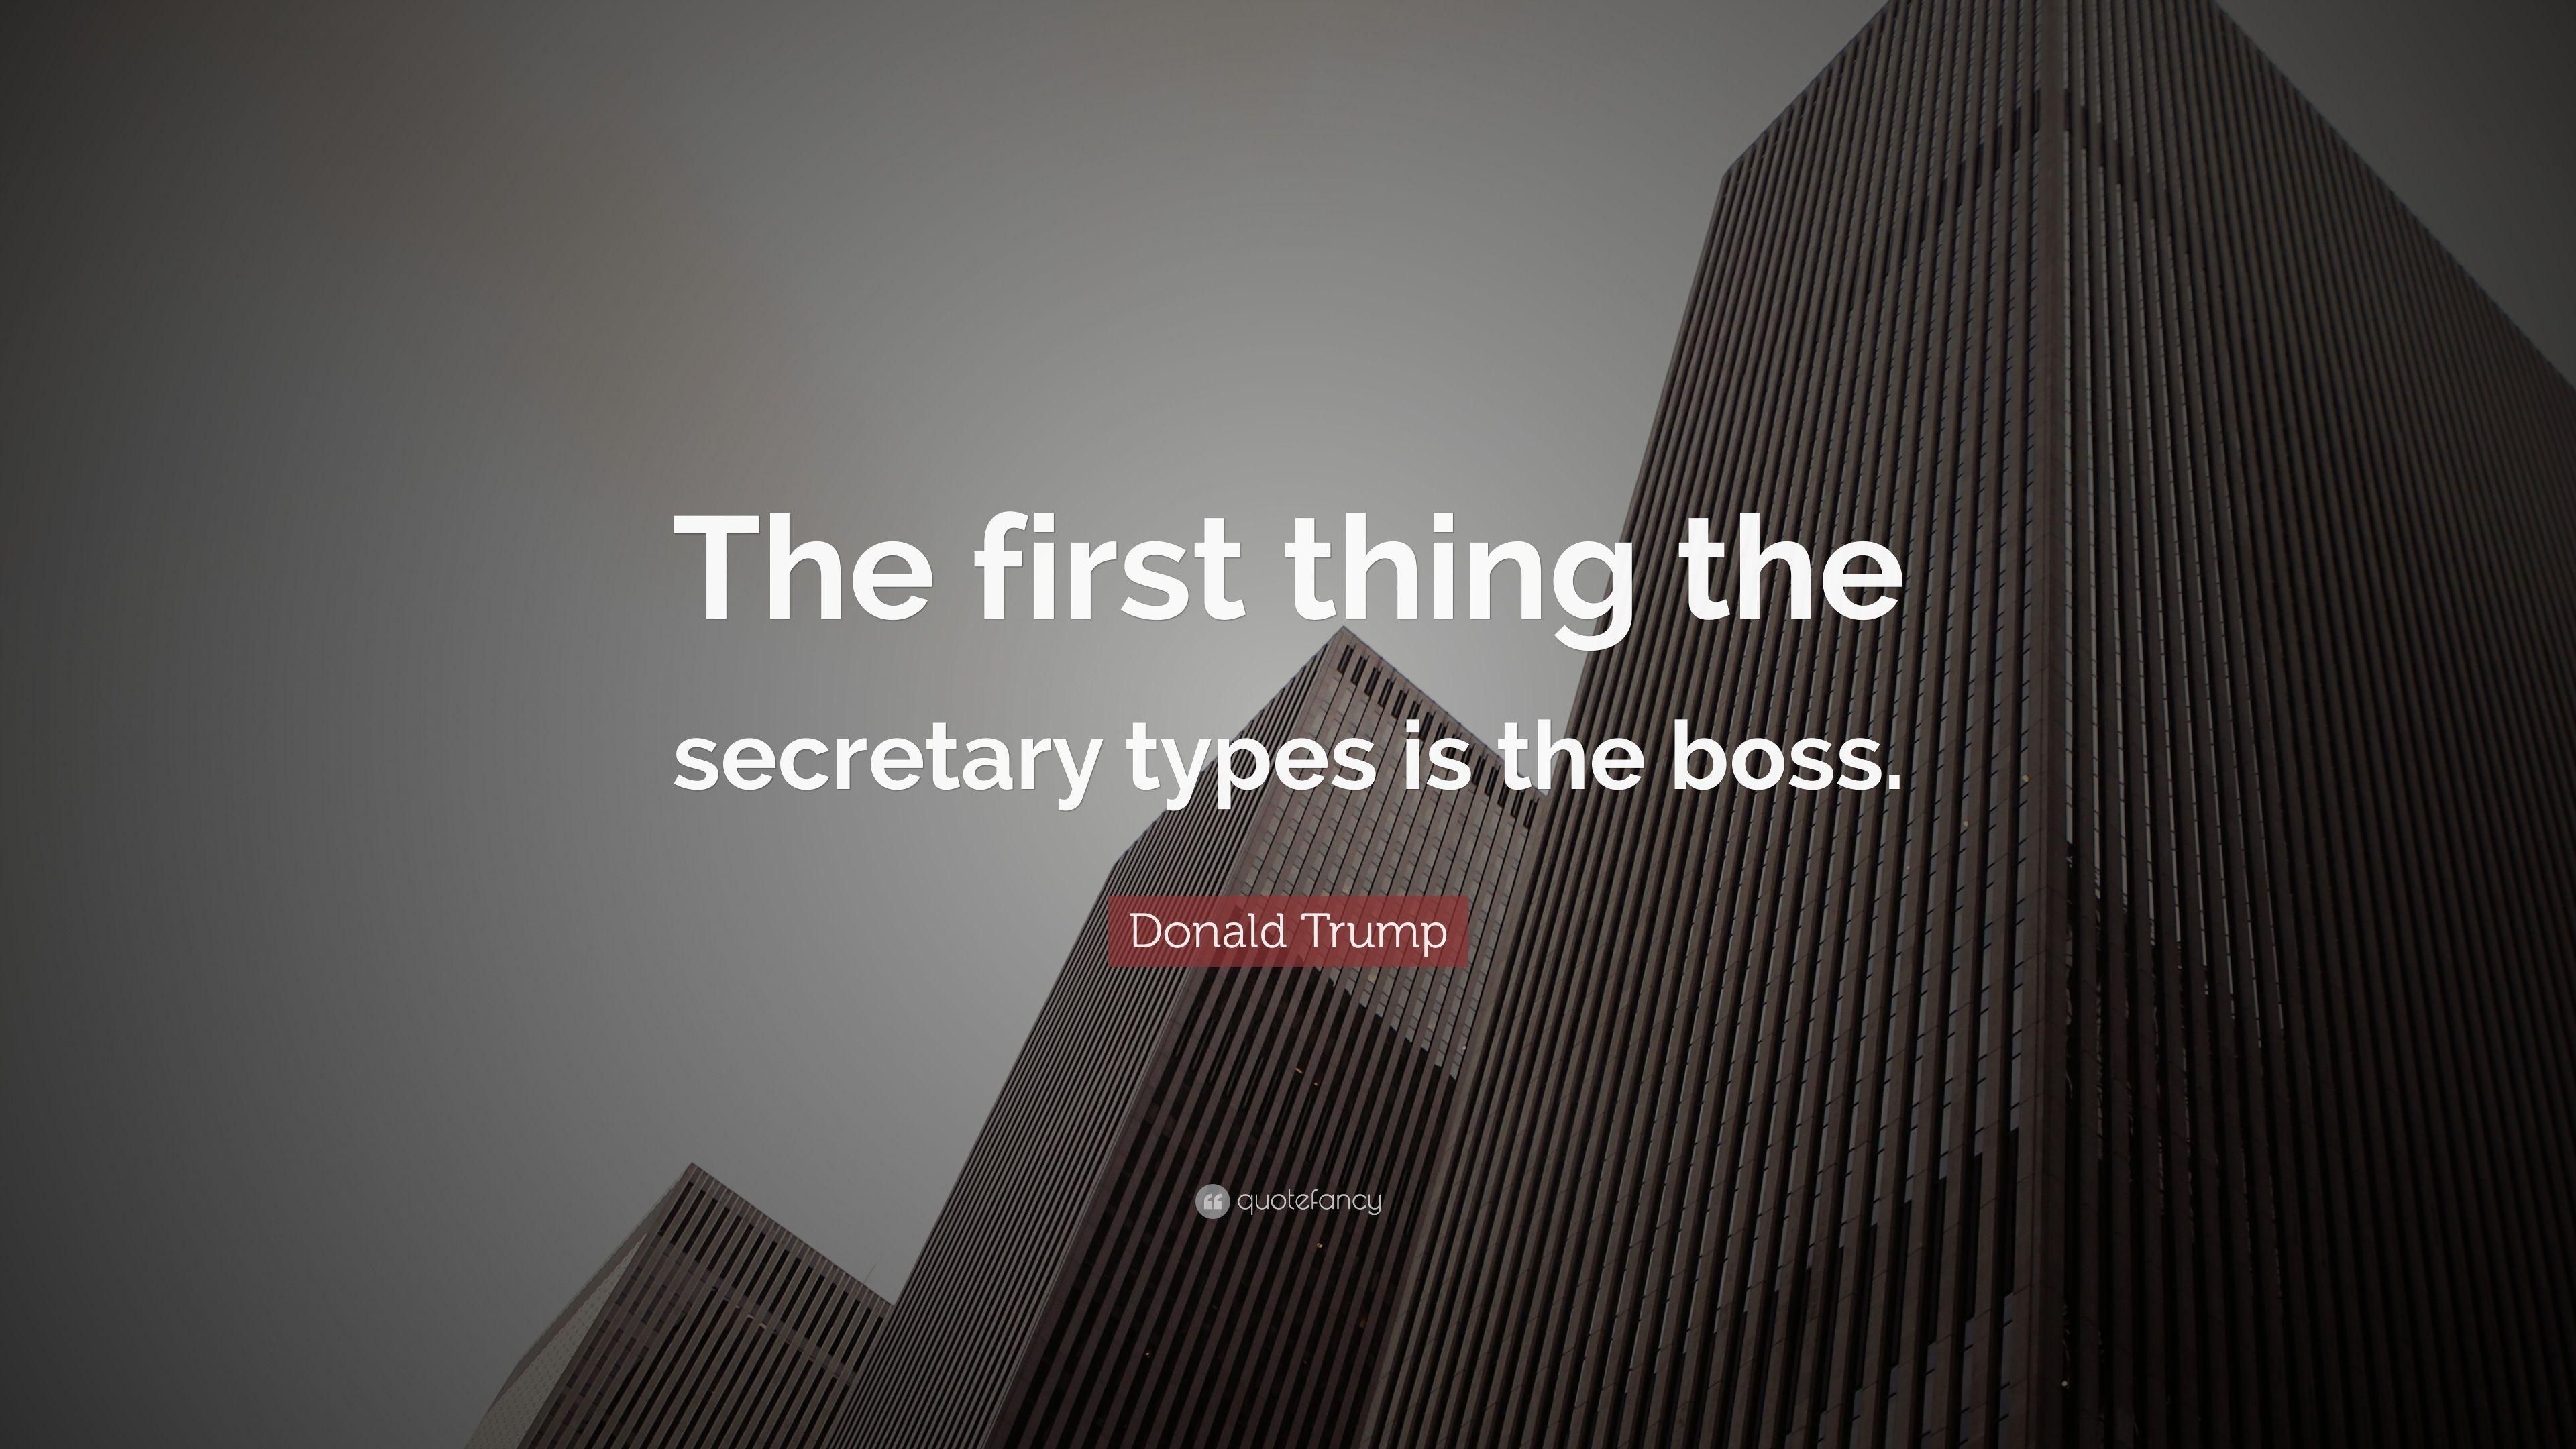 Donald Trump Quote: “The first thing the secretary types is the boss